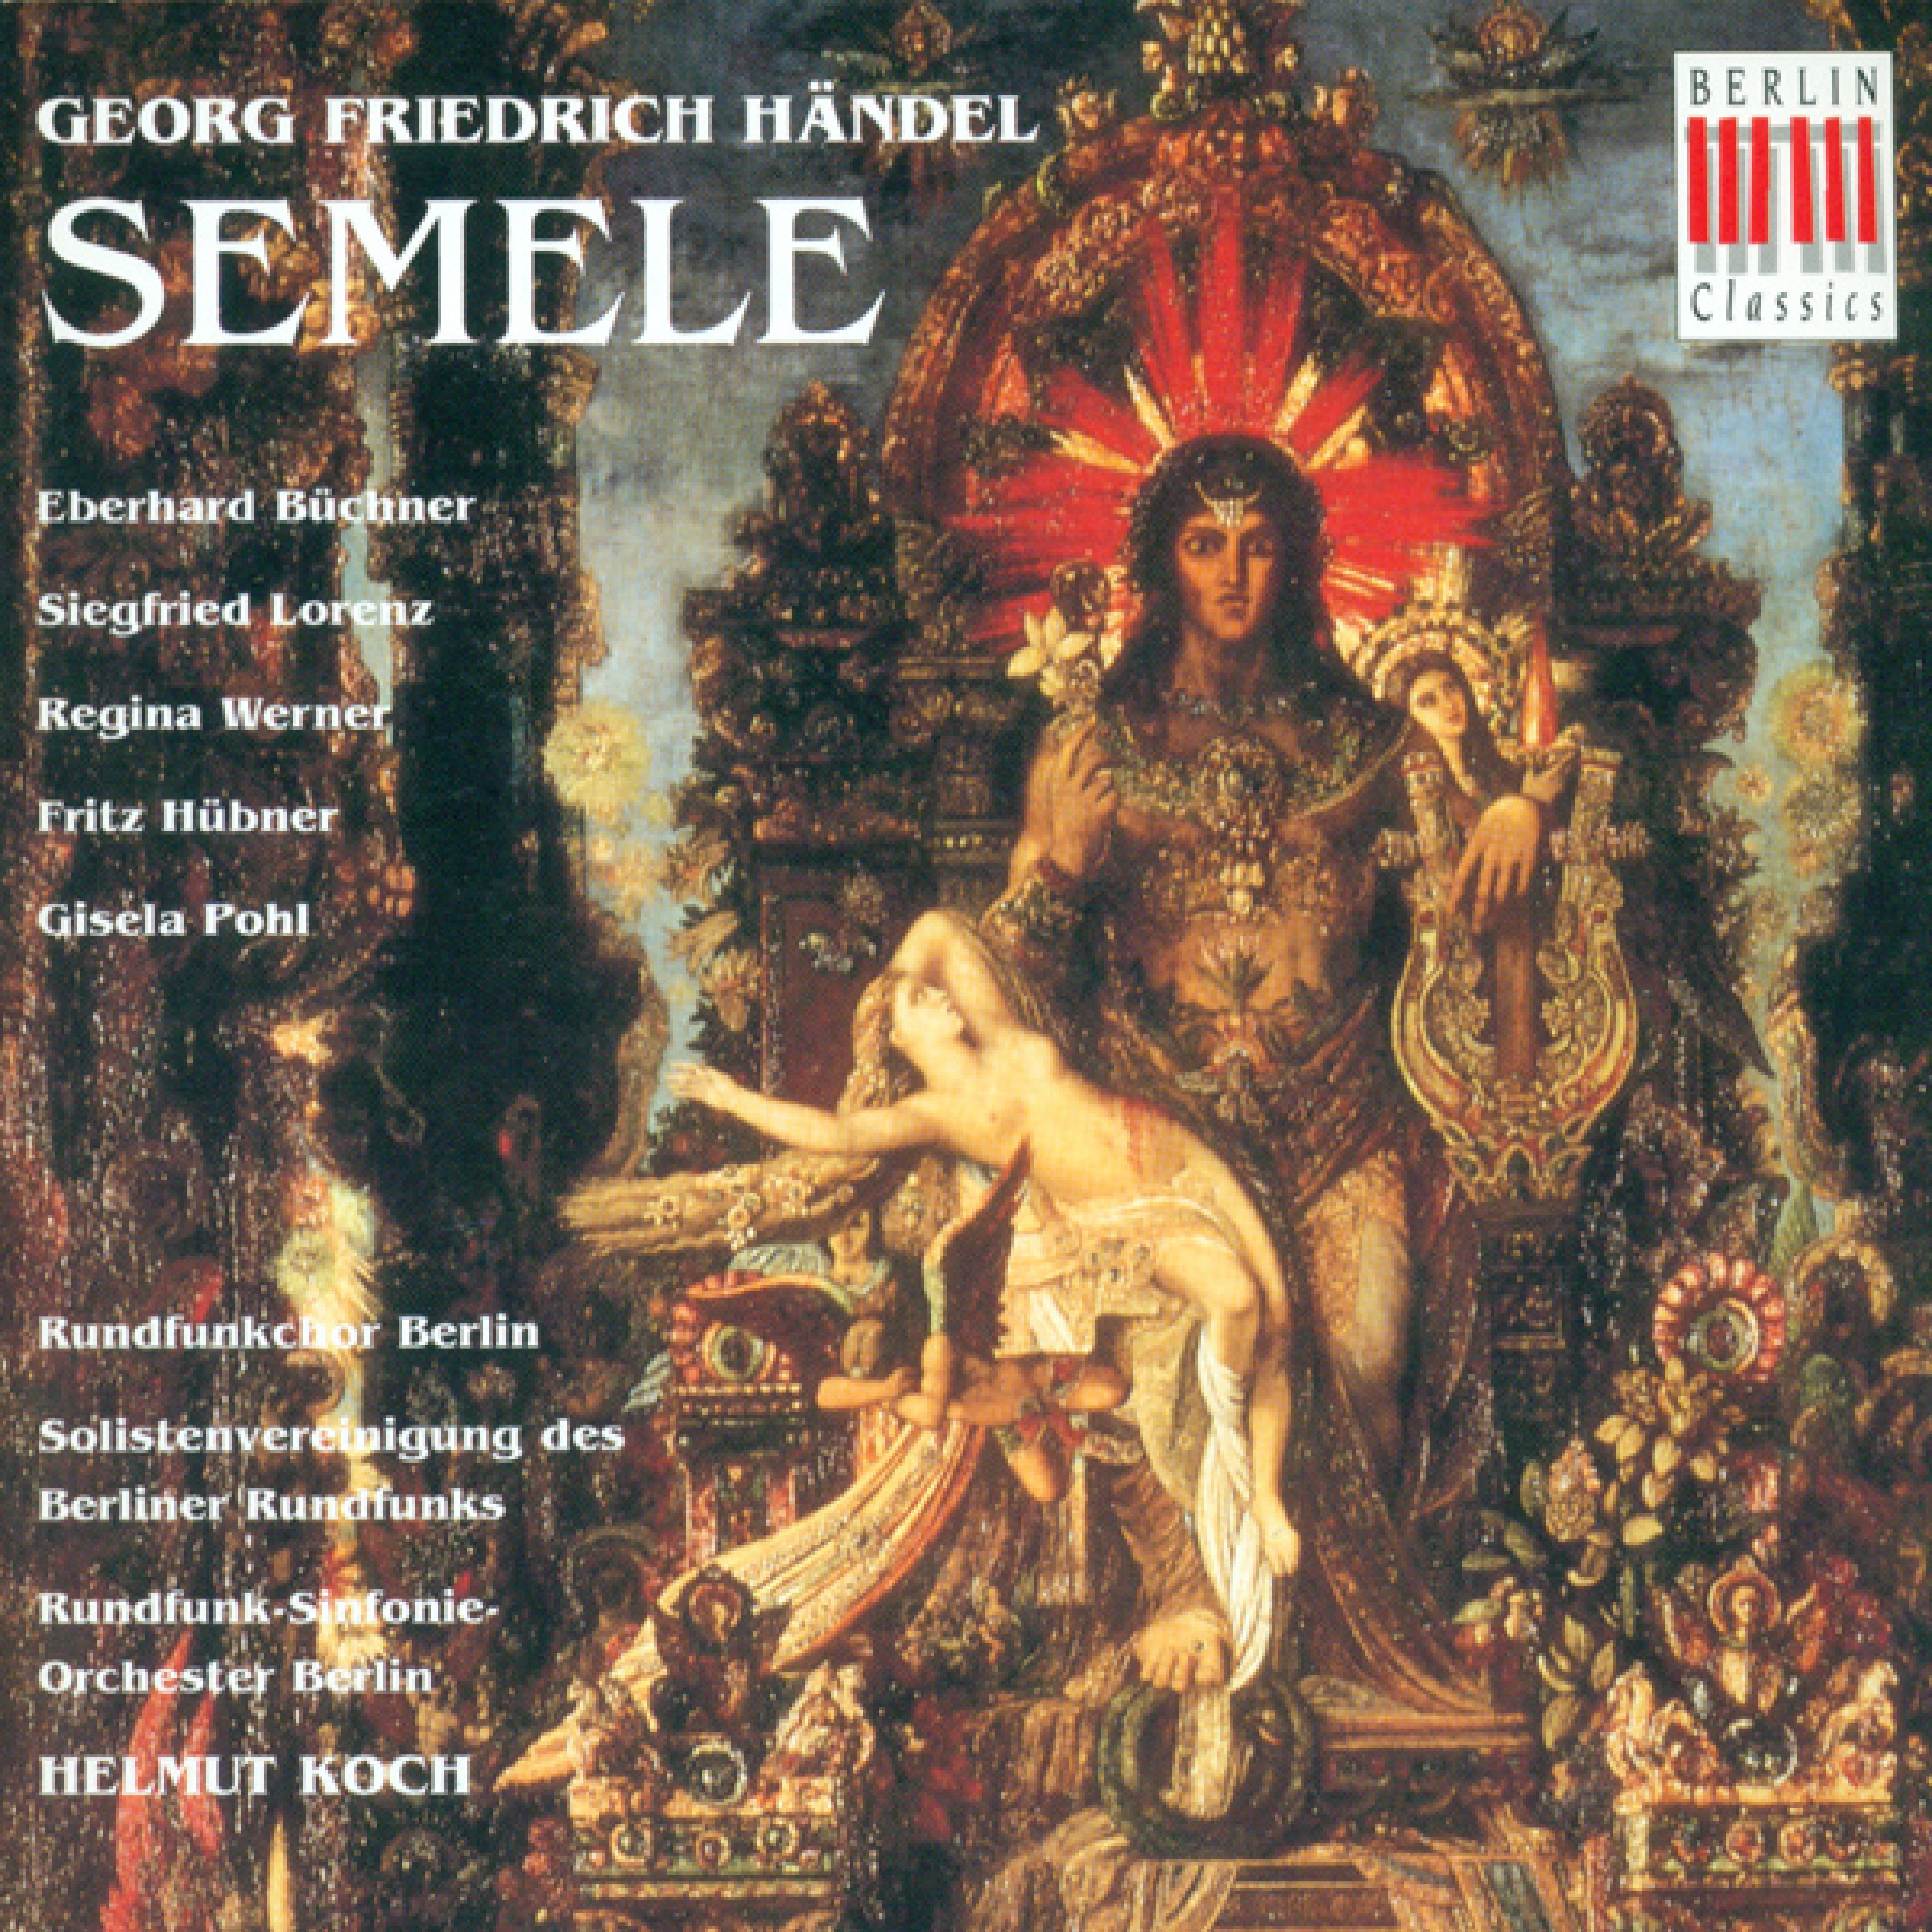 Semele, HWV 58: Act II - "Let me not another moment bear the pangs of absence"